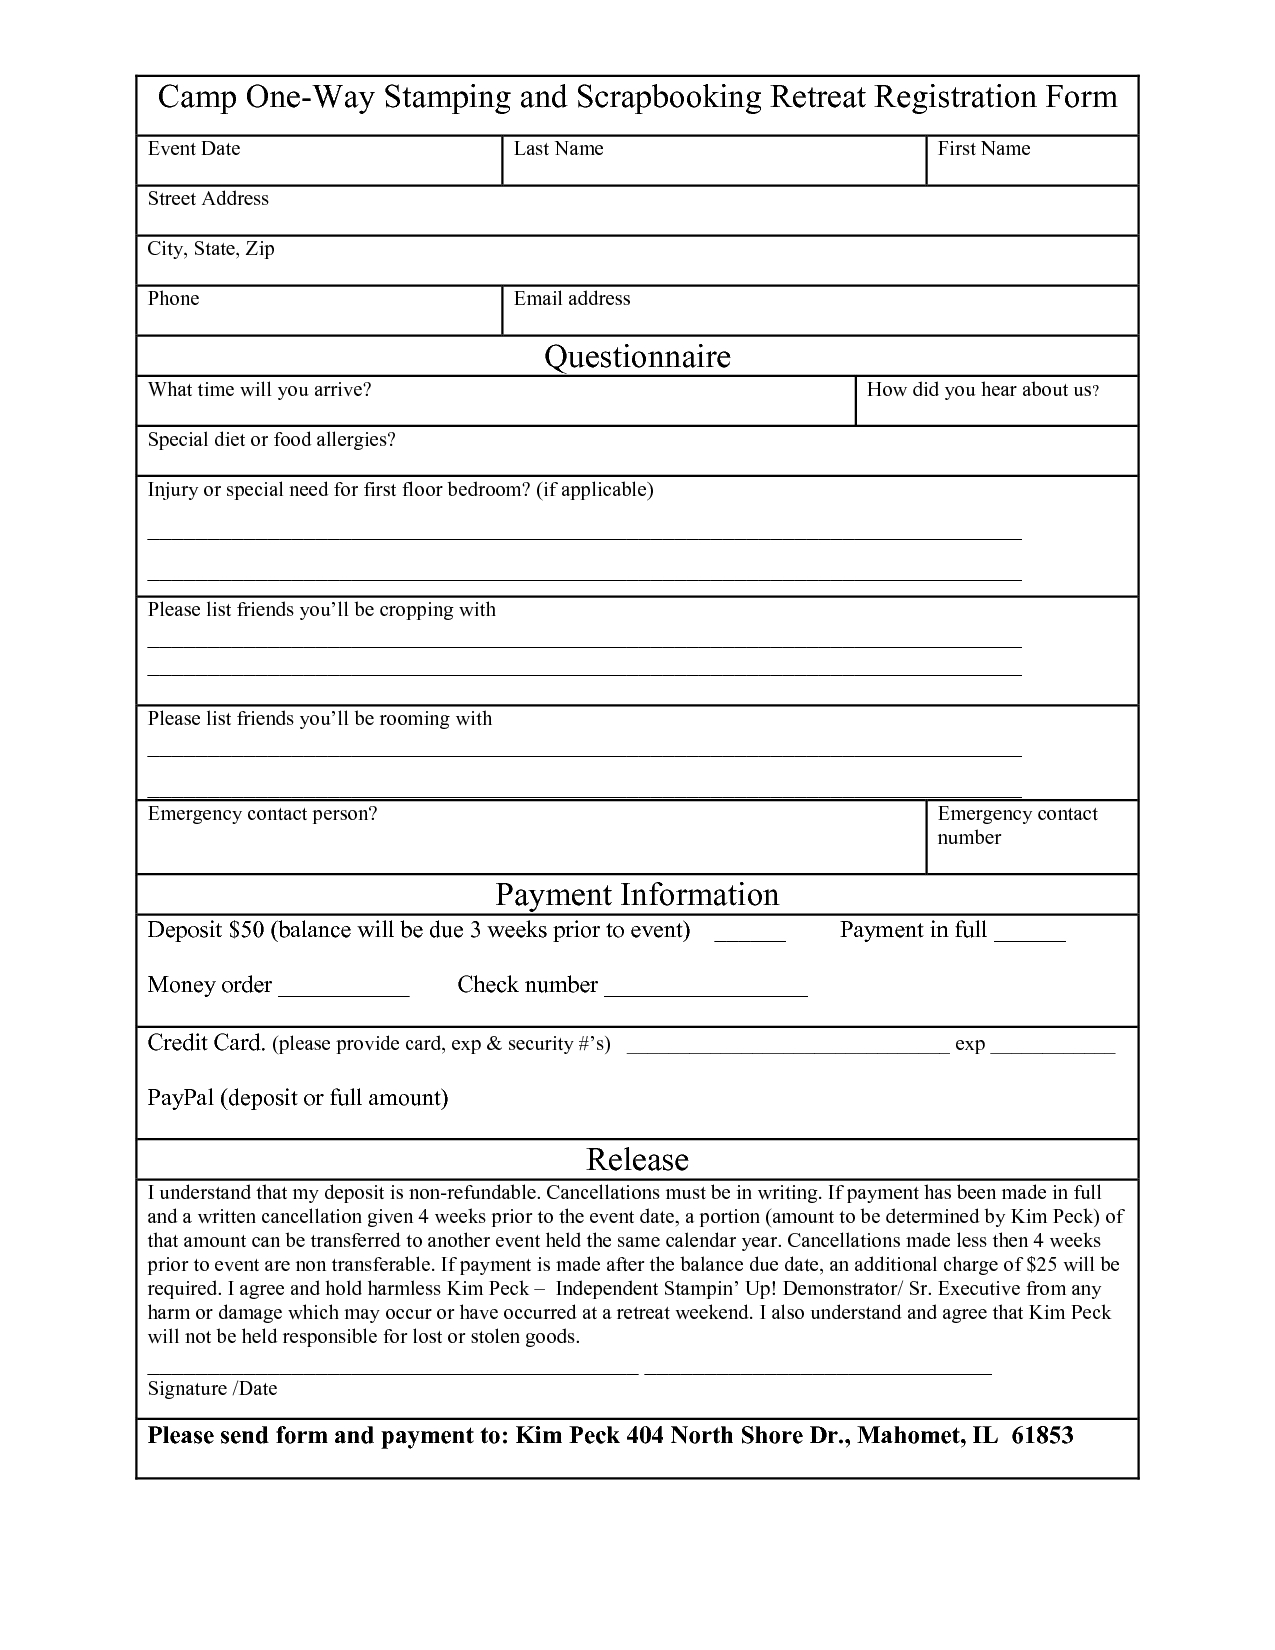 002 Template Ideas Customer Application Form Word Top Survey Throughout Seminar Registration Form Template Word